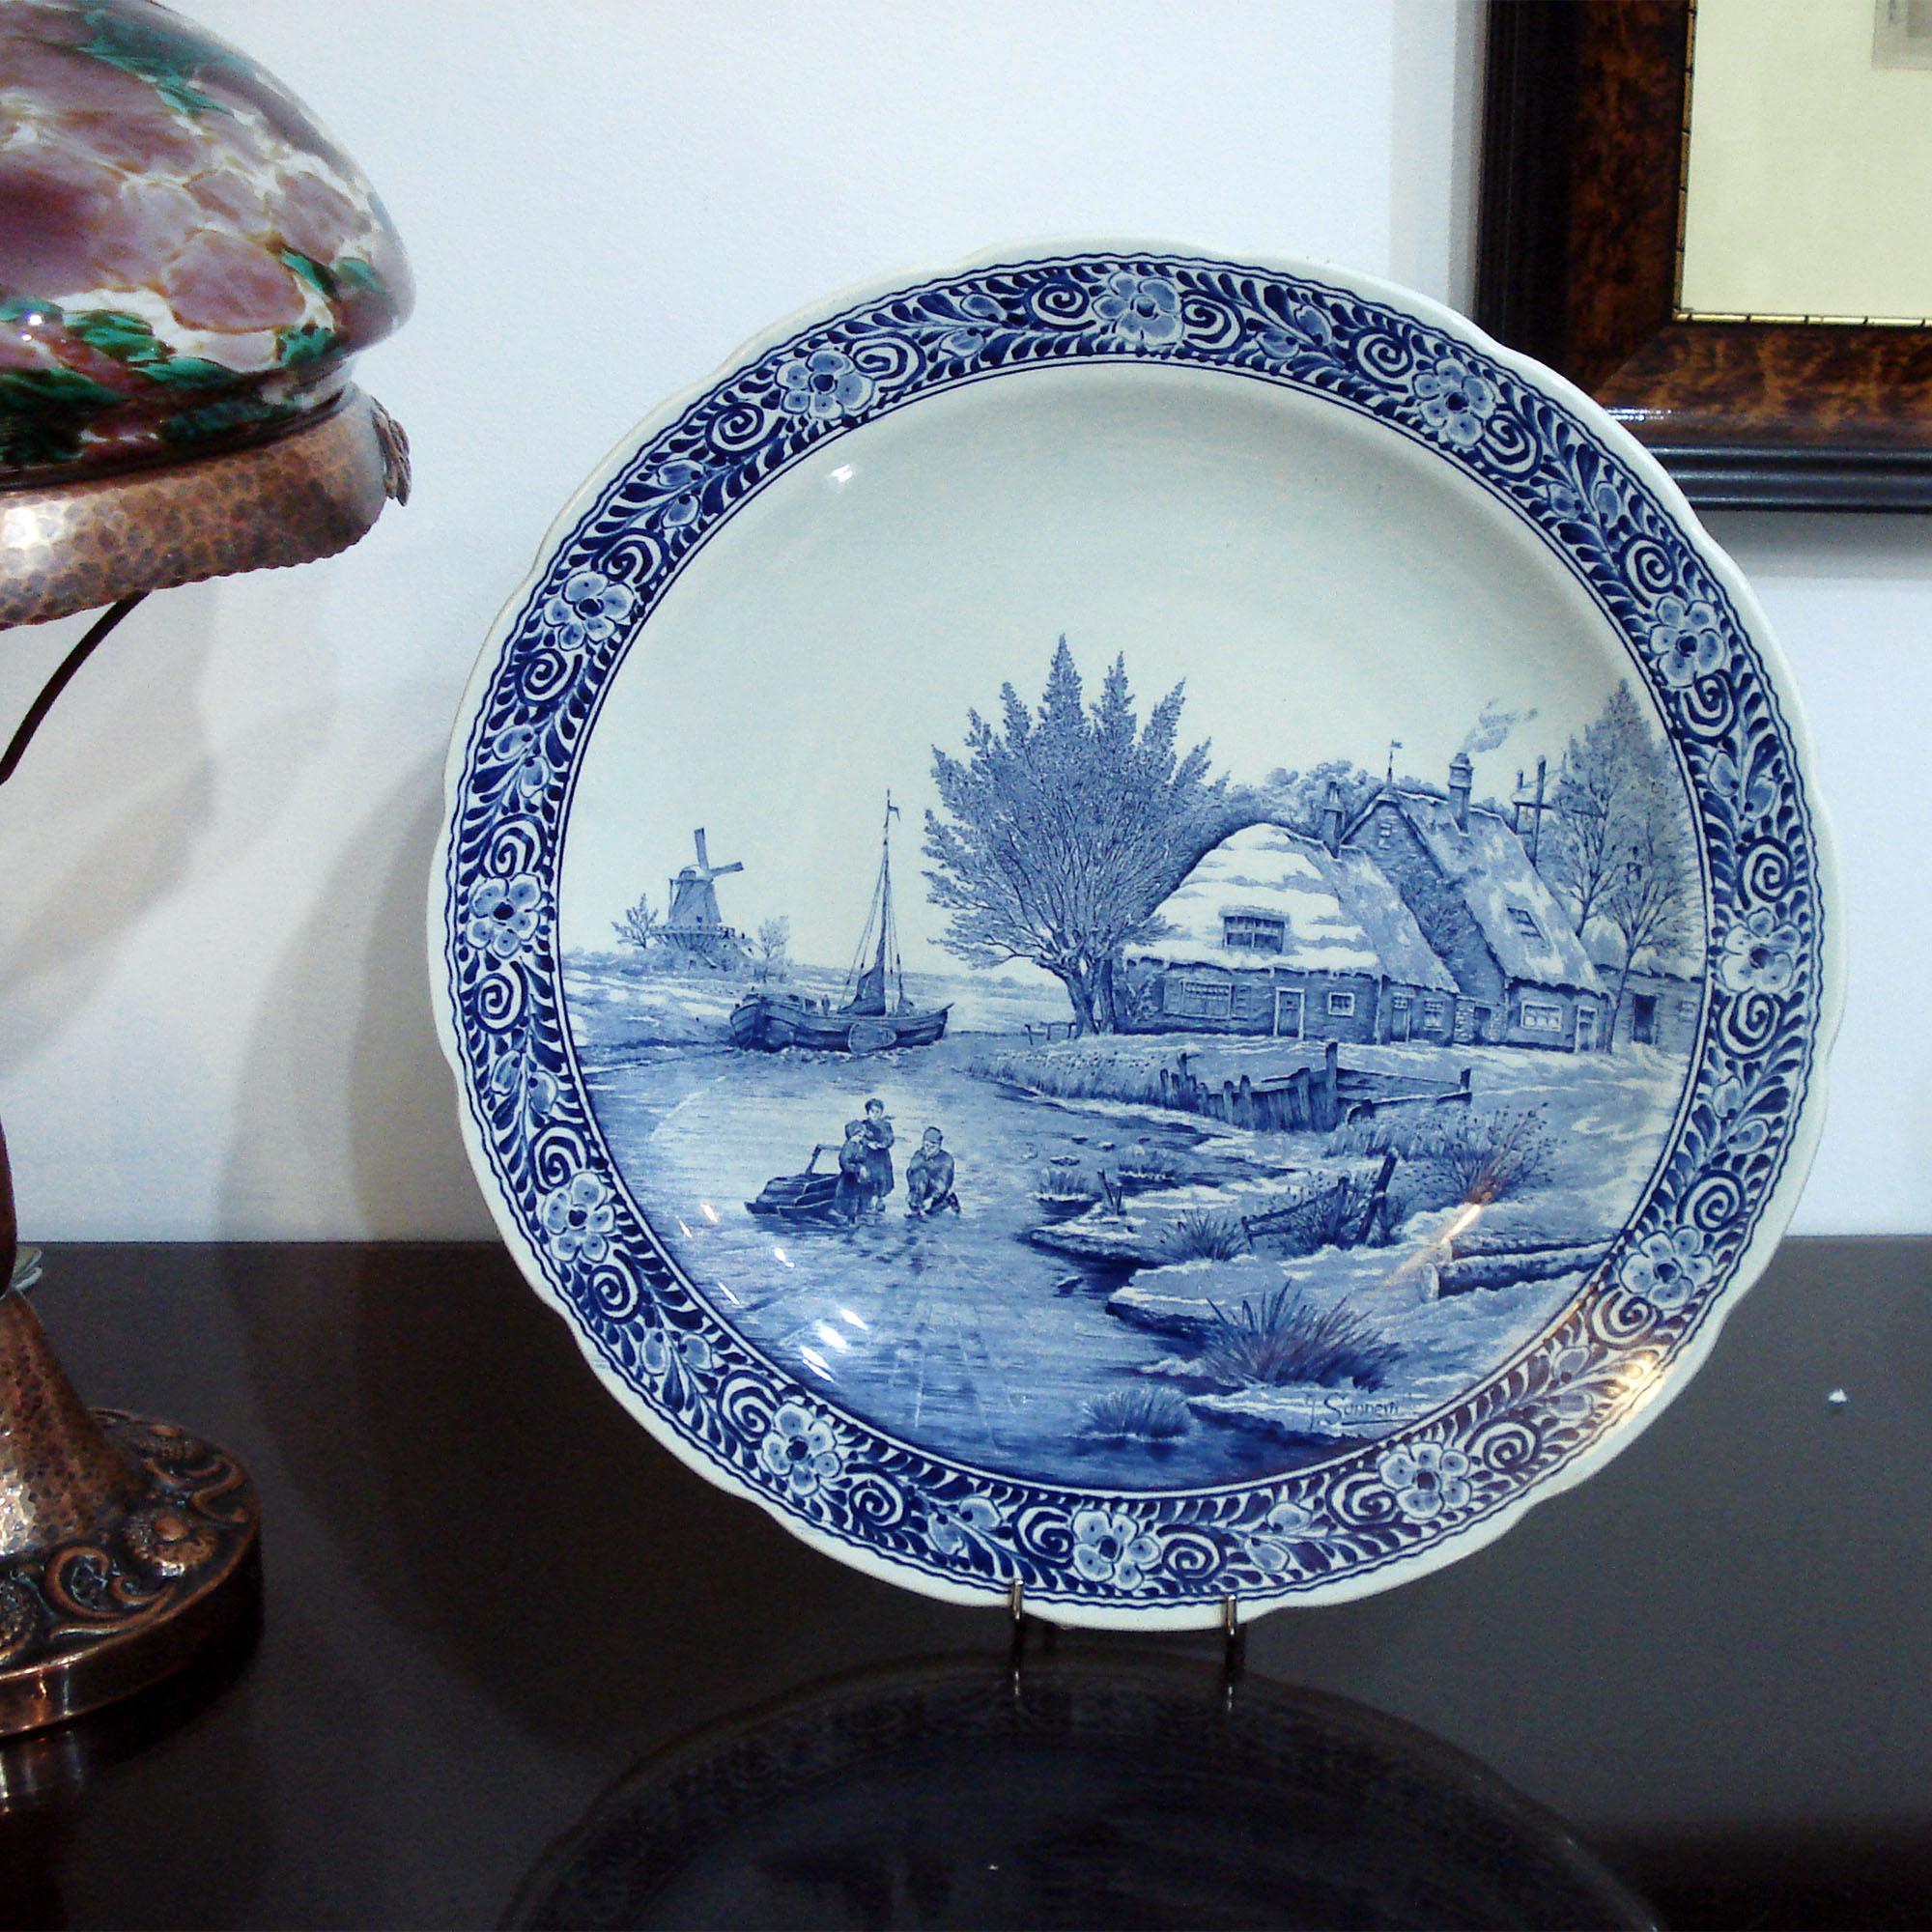 Vintage large wall hanging plate by Delfts Royal Sphinx. Hand painted decorative floral border, center design in transfer ware technique. Blue and white cottage scene, Dutch windmill and boat, people skating on the frozen lake. Hanging wire on the